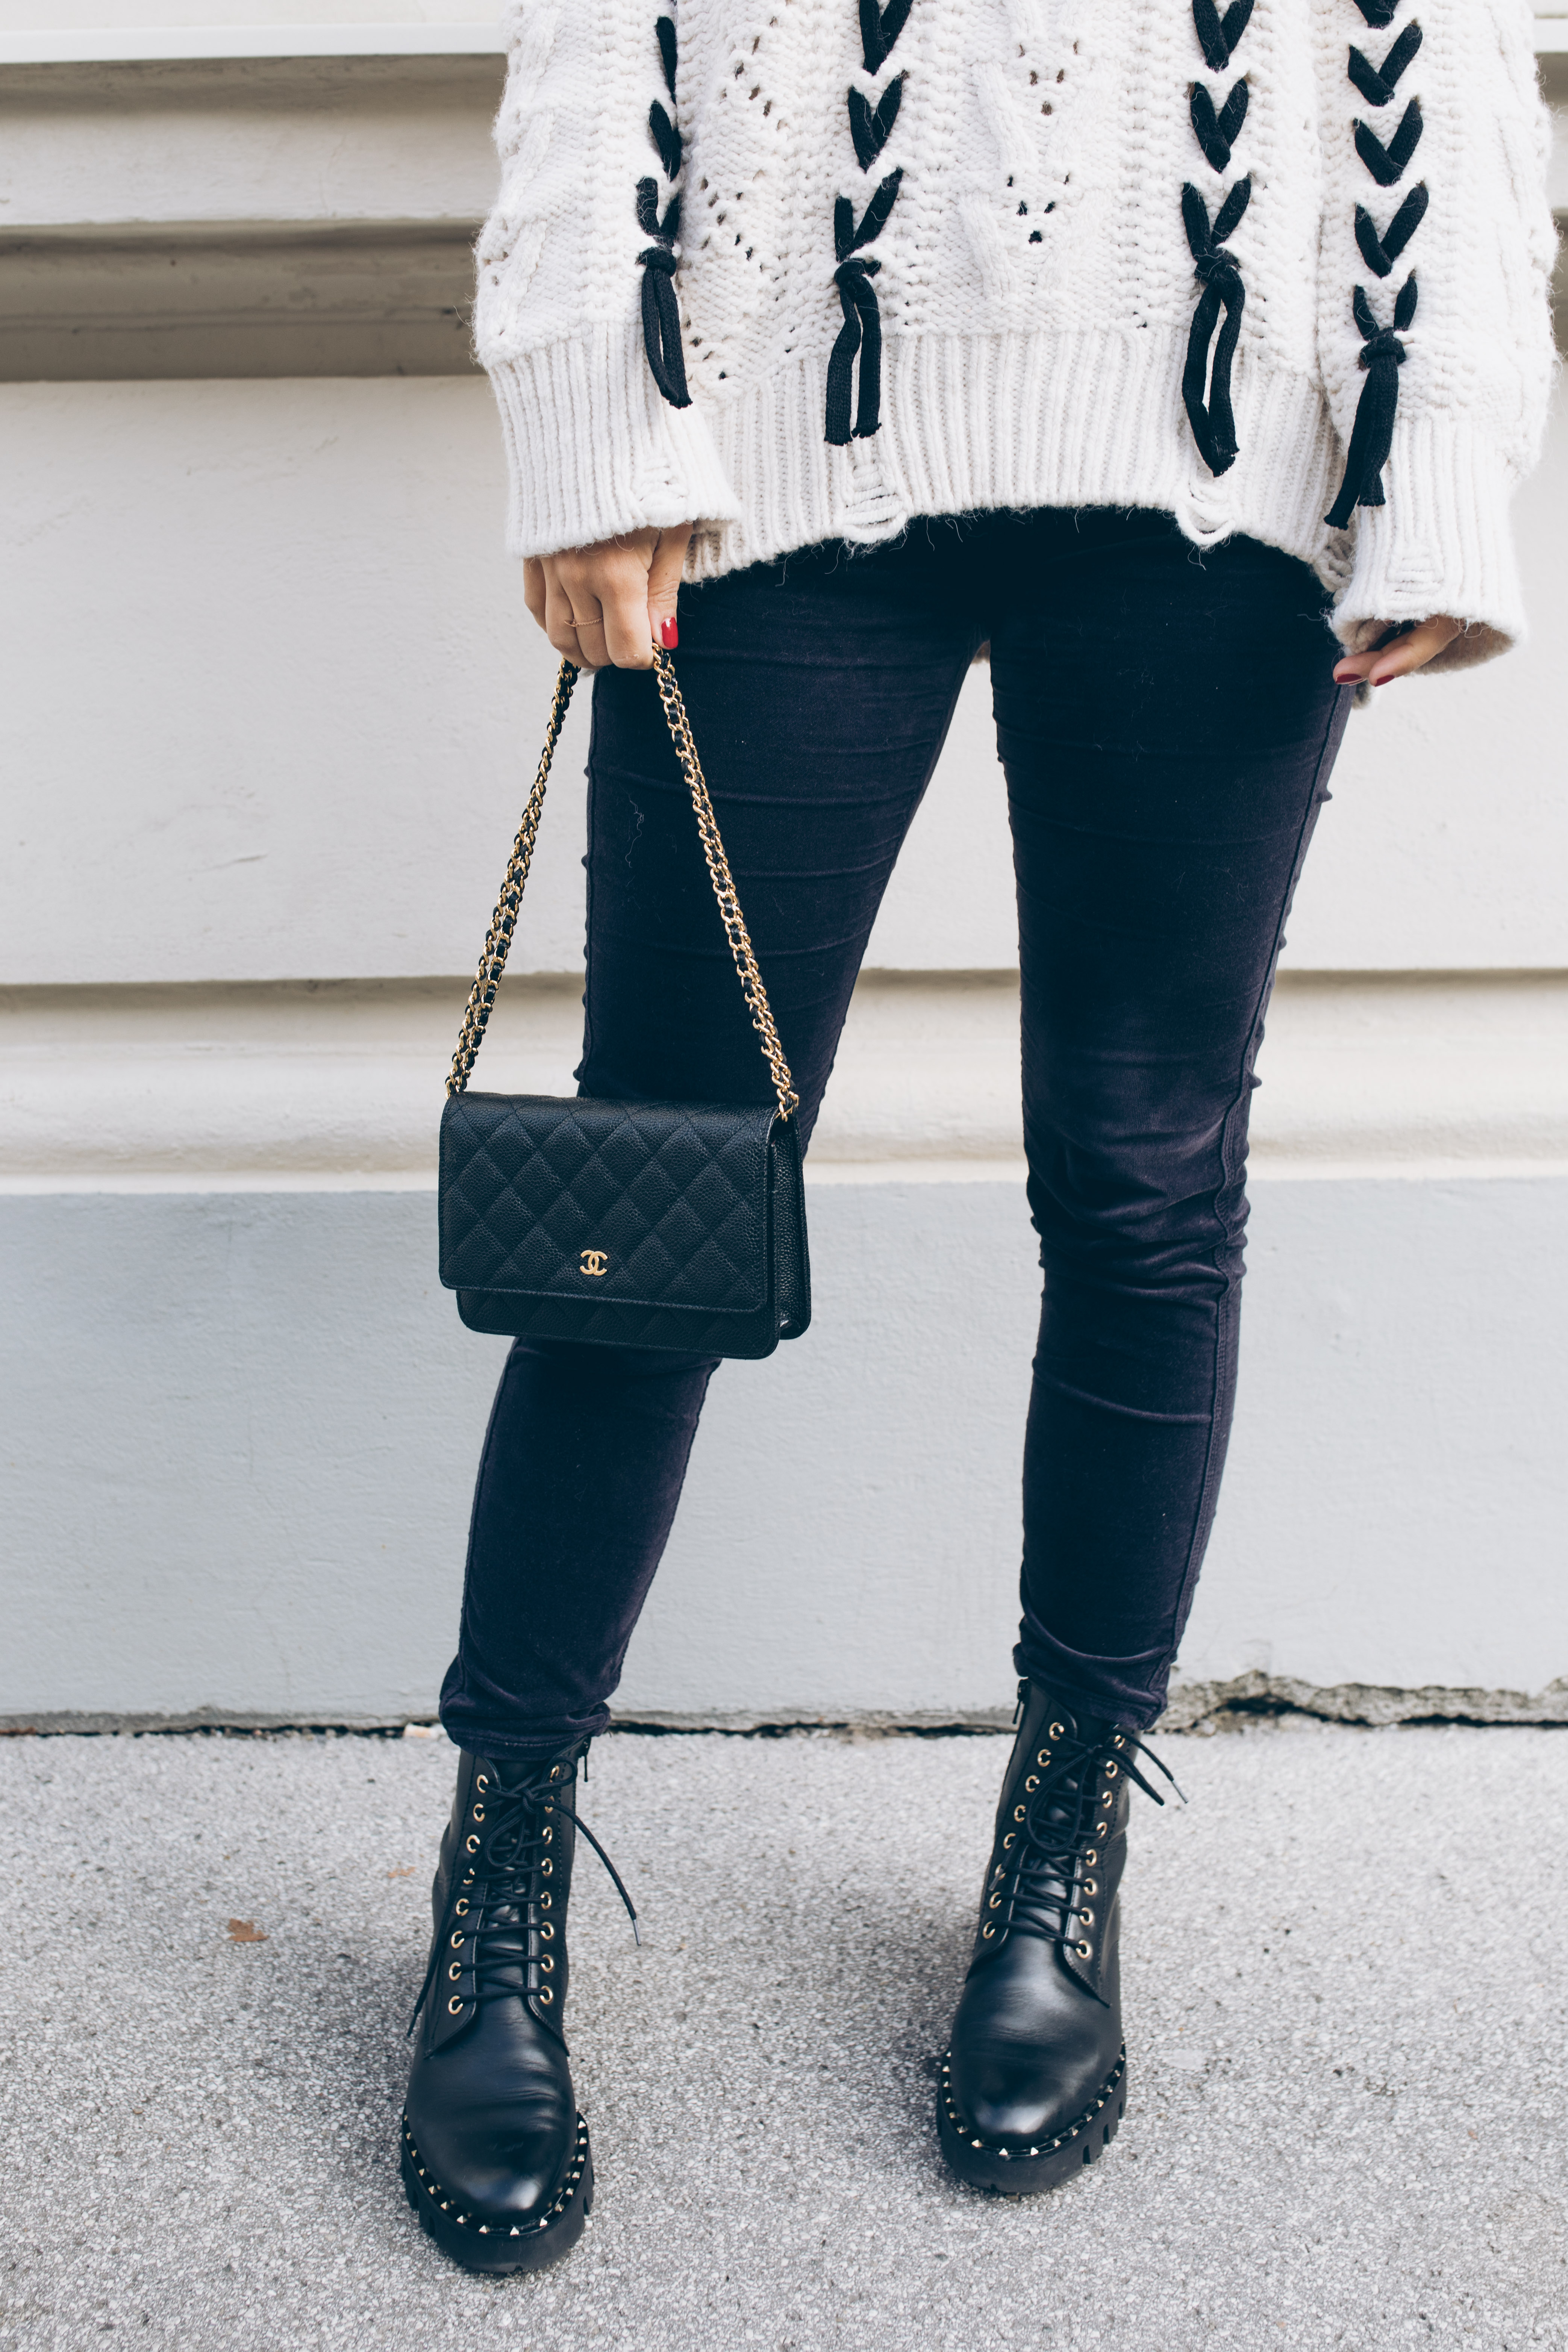 1 Handbag 10 Outfits  Styling The Chanel Wallet On Chain WOC